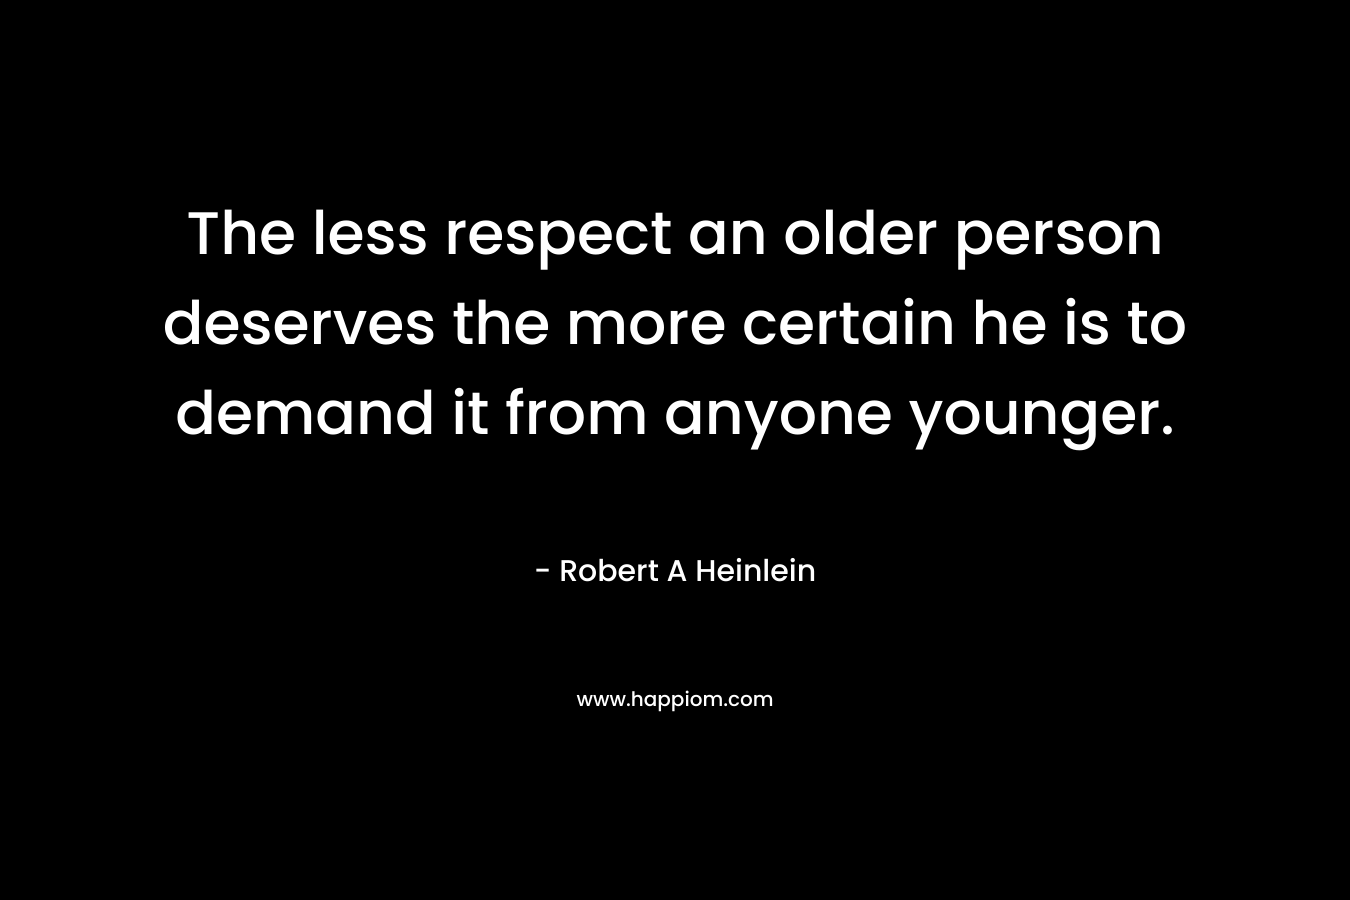 The less respect an older person deserves the more certain he is to demand it from anyone younger. – Robert A Heinlein